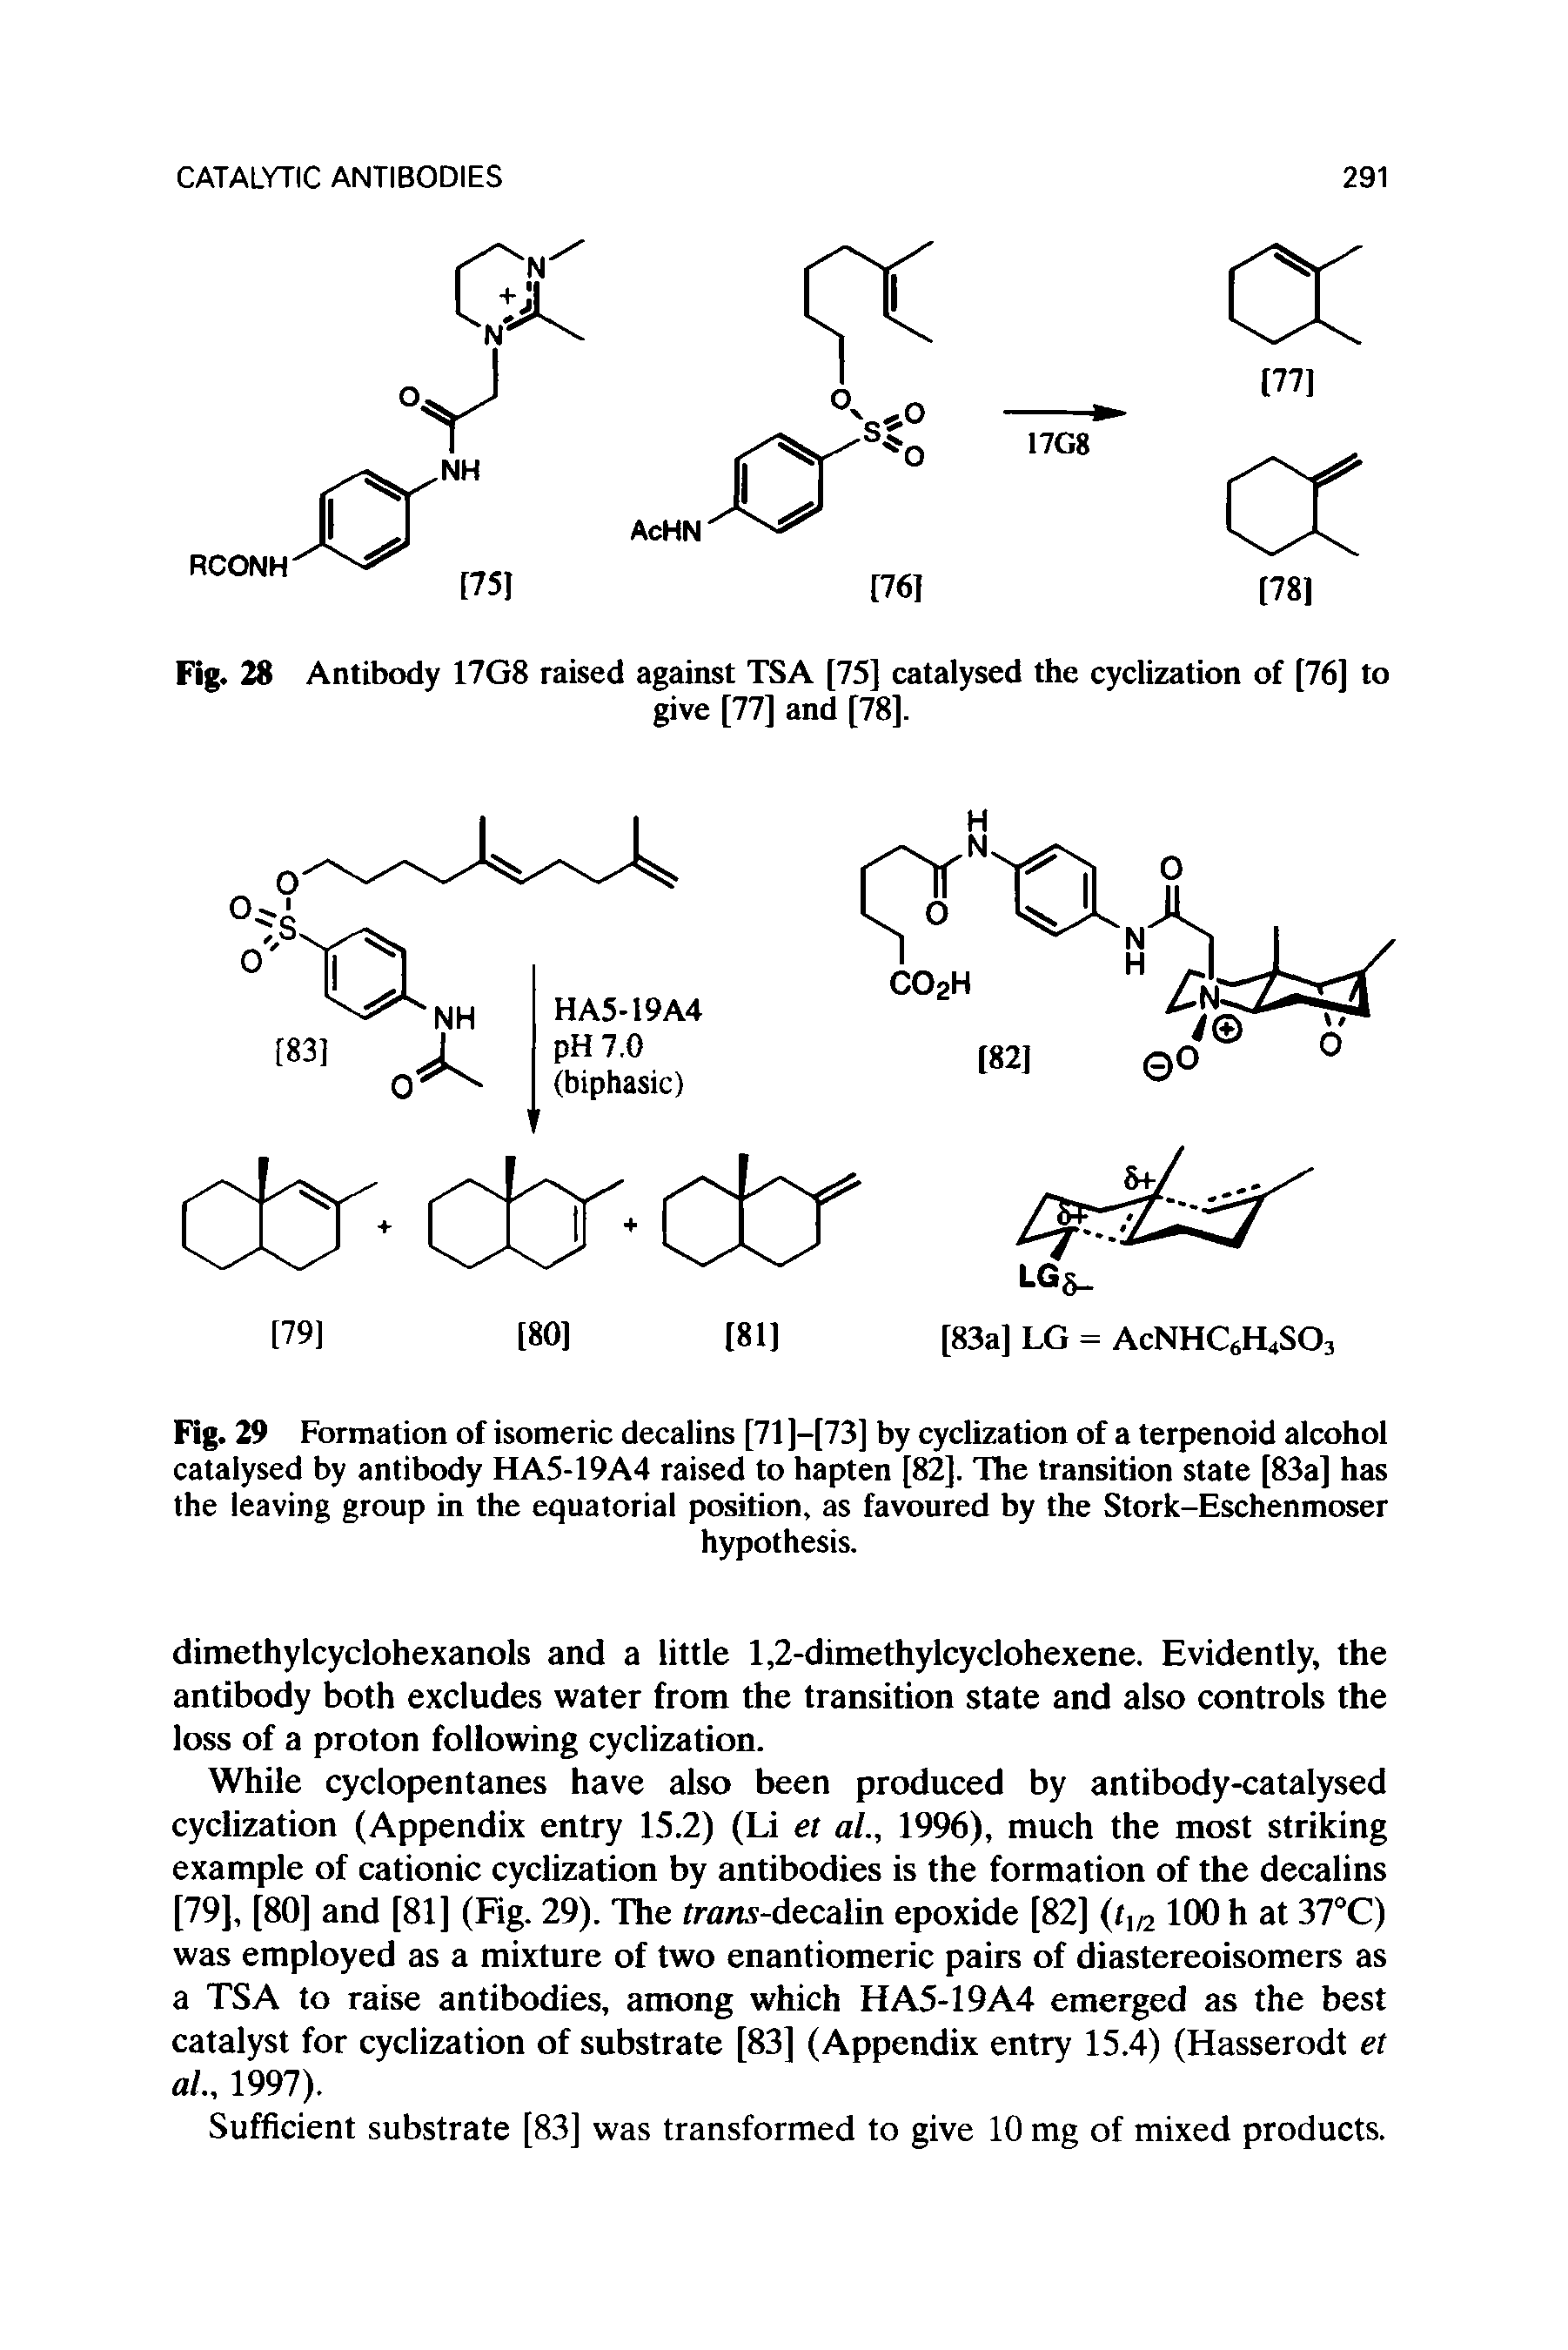 Fig. 29 Formation of isomeric decalins [71 ]—[73] by cyclization of a terpenoid alcohol catalysed by antibody HA5-19A4 raised to hapten [82]. The transition state [83a] has the leaving group in the equatorial position, as favoured by the Stork-Eschenmoser...